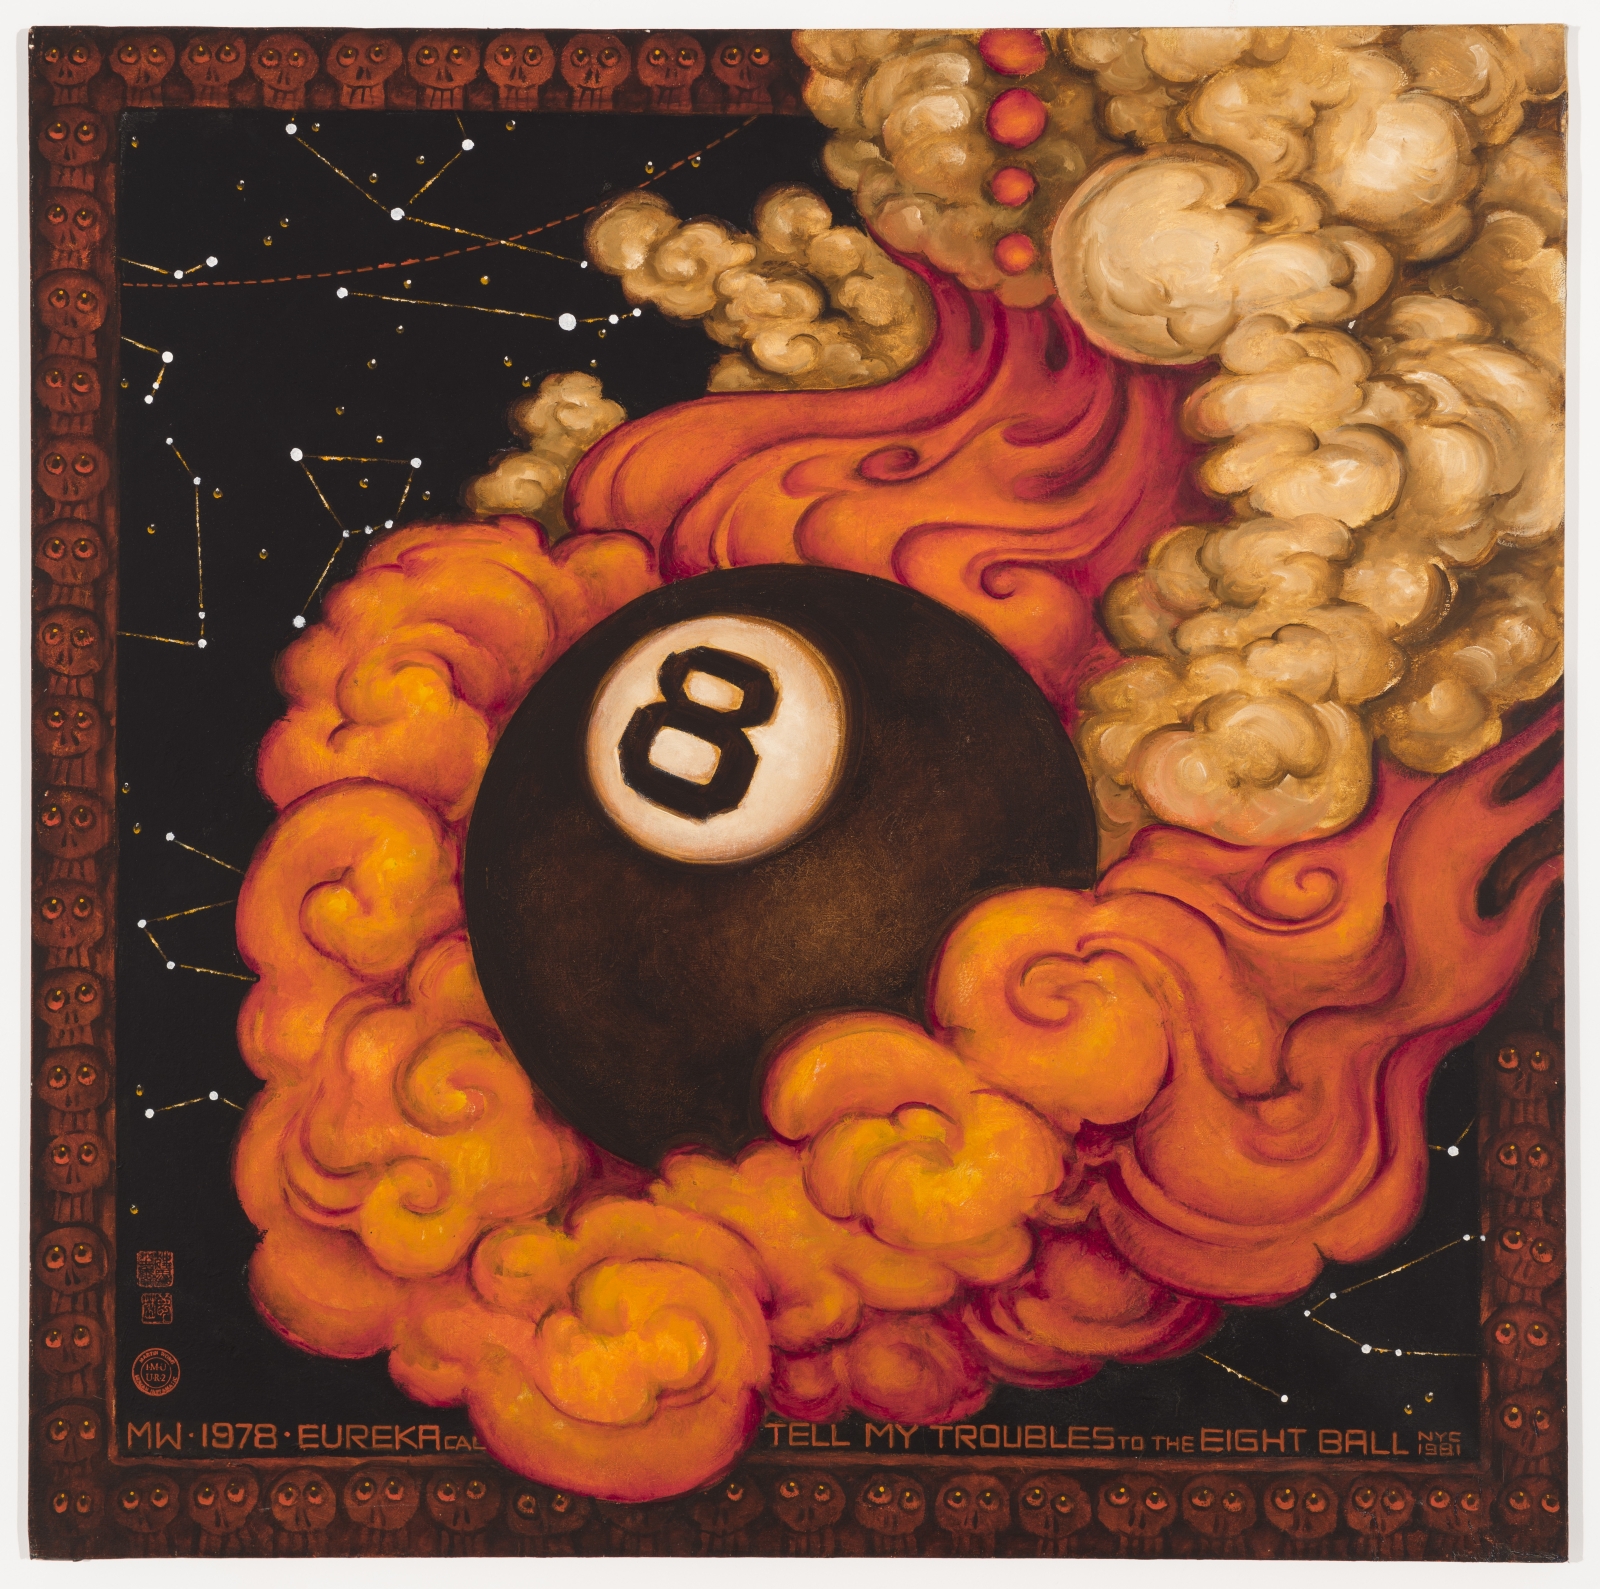 Martin Wong
Tell My Troubles to the Eight Ball (Eureka), 1978-81
acrylic on canvas
48 x 48 in.
121.9 x 121.9 cm